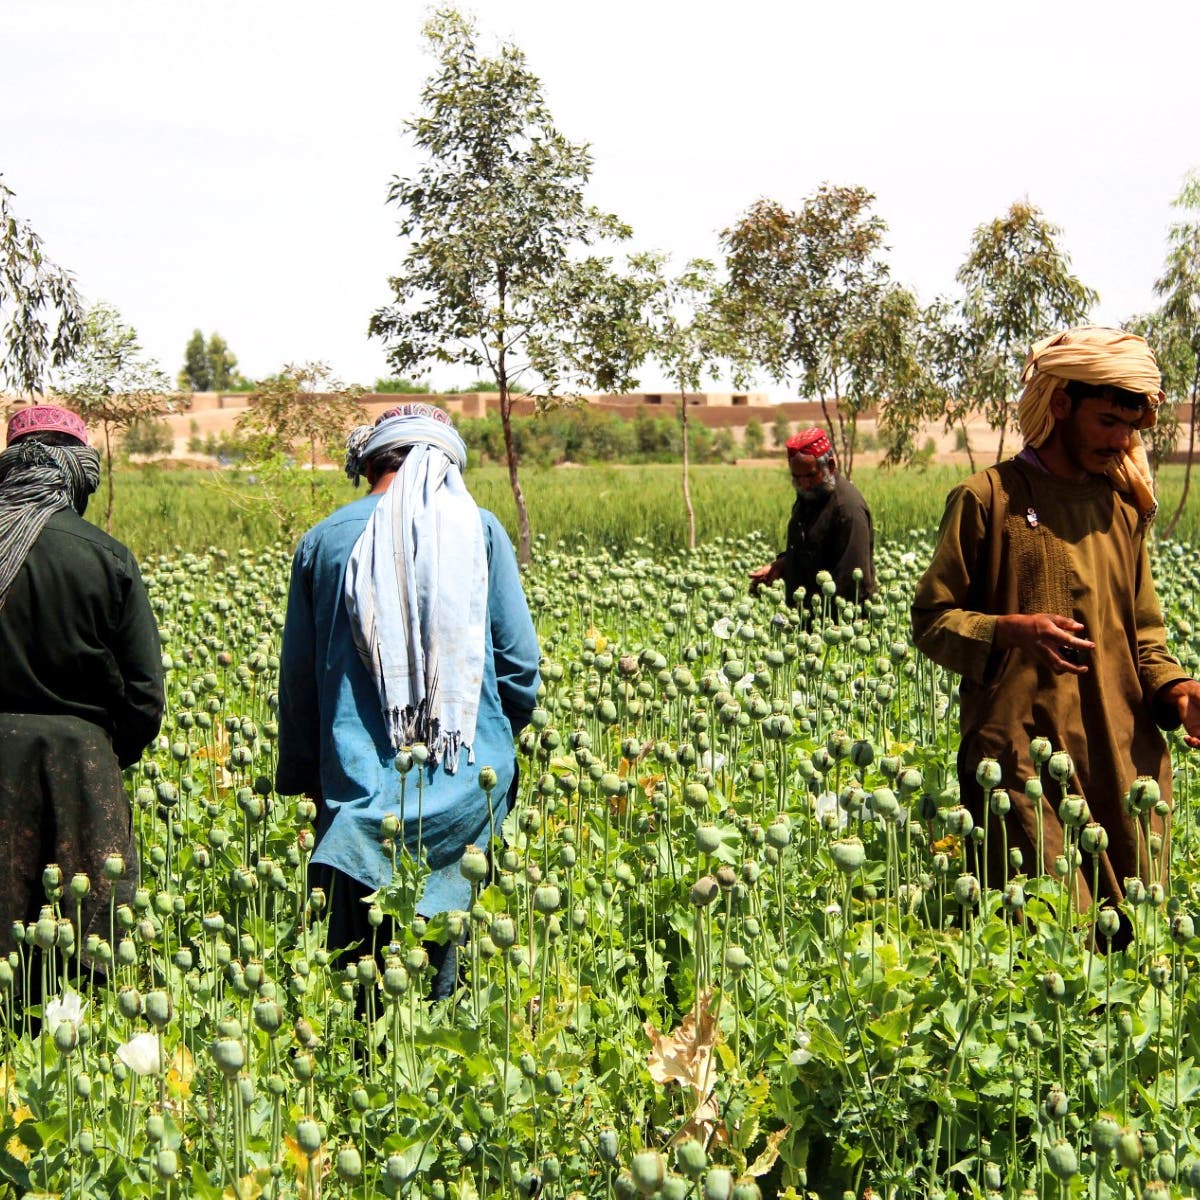 Taliban turns a blind eye as Afghanistan’s opium business thrives: Report 